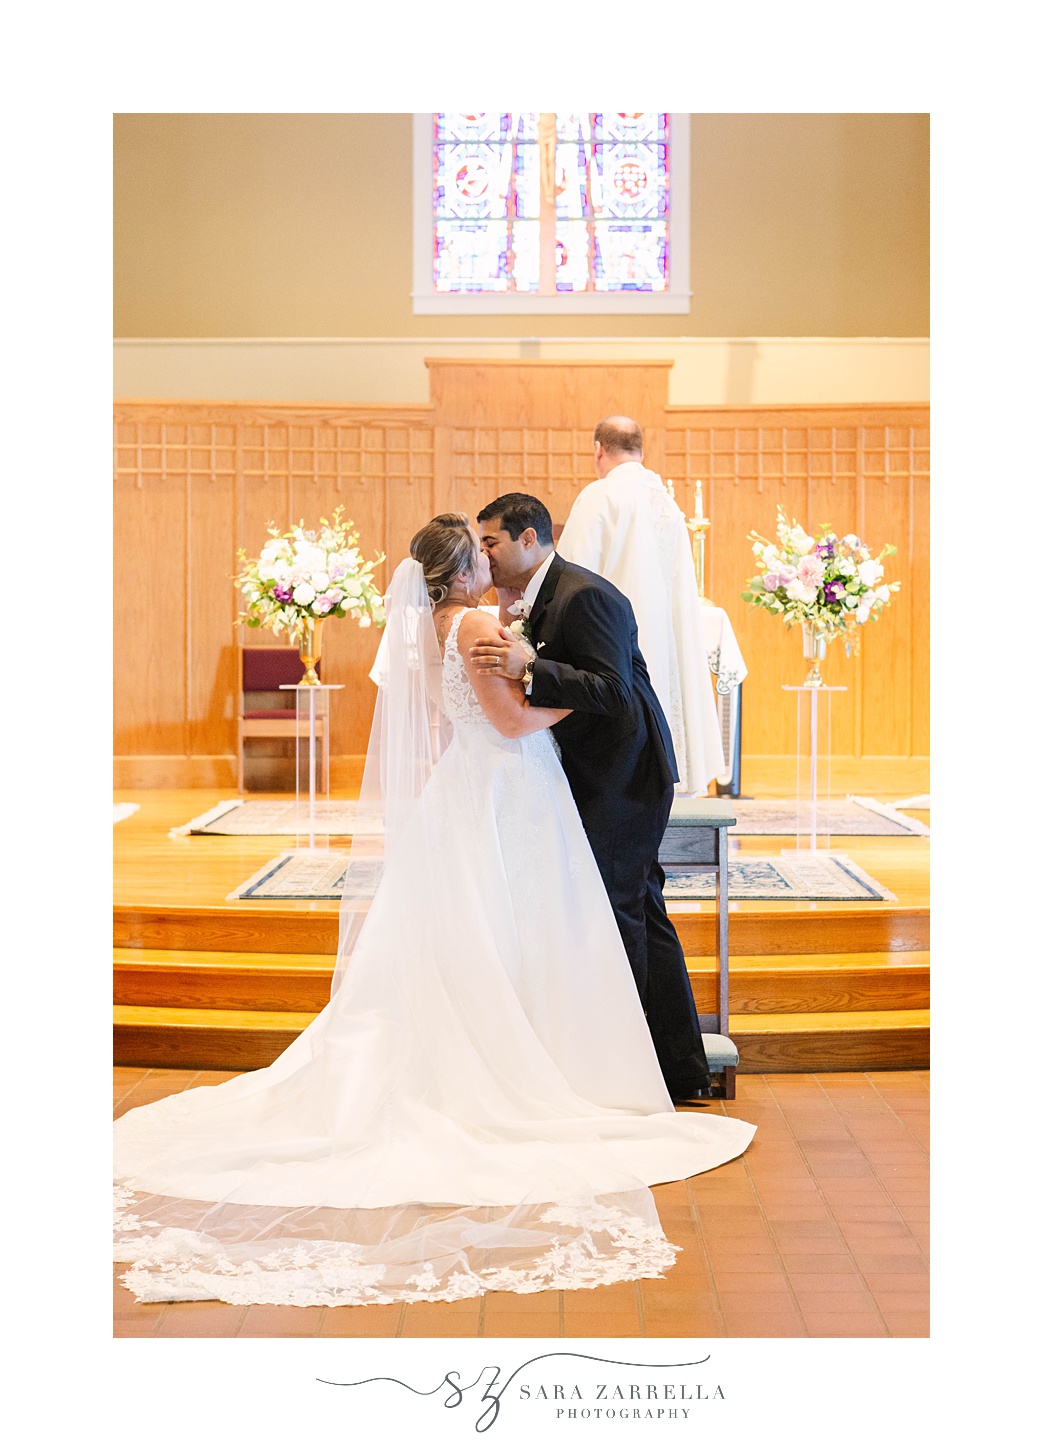 bride and groom kiss during traditional wedding ceremony in Rhode Island church